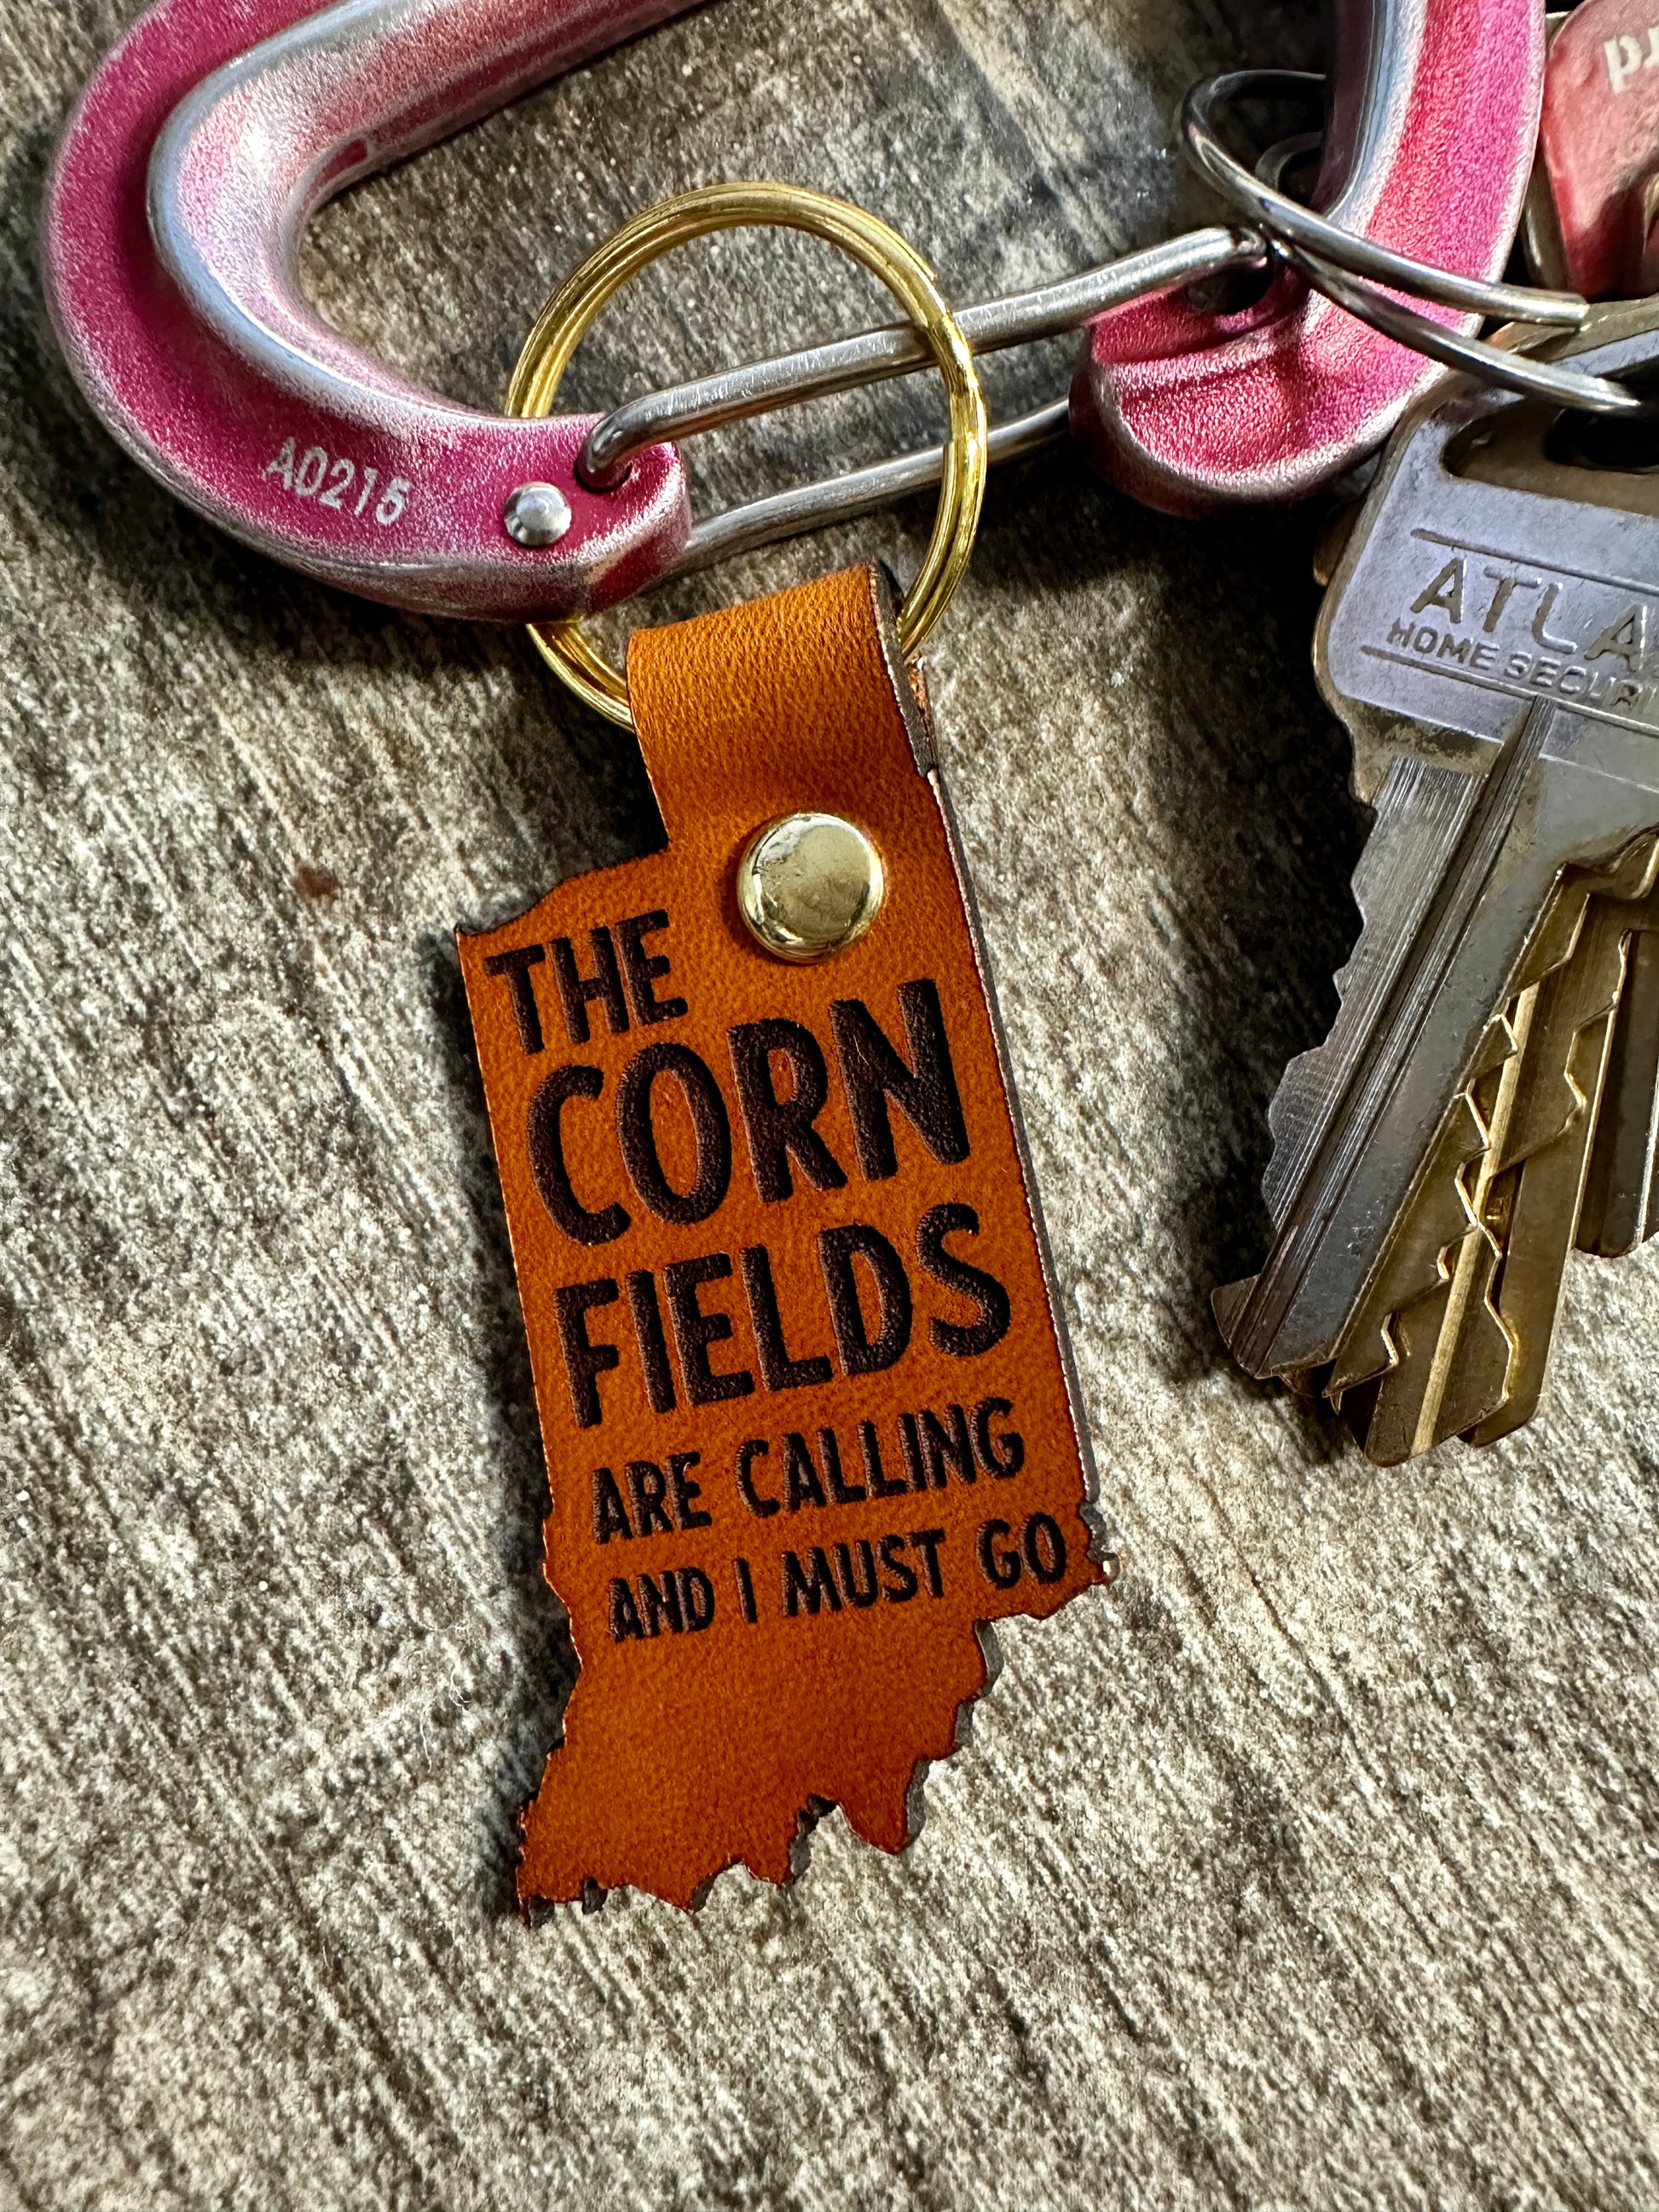 cornfields are calling and I must go keychain